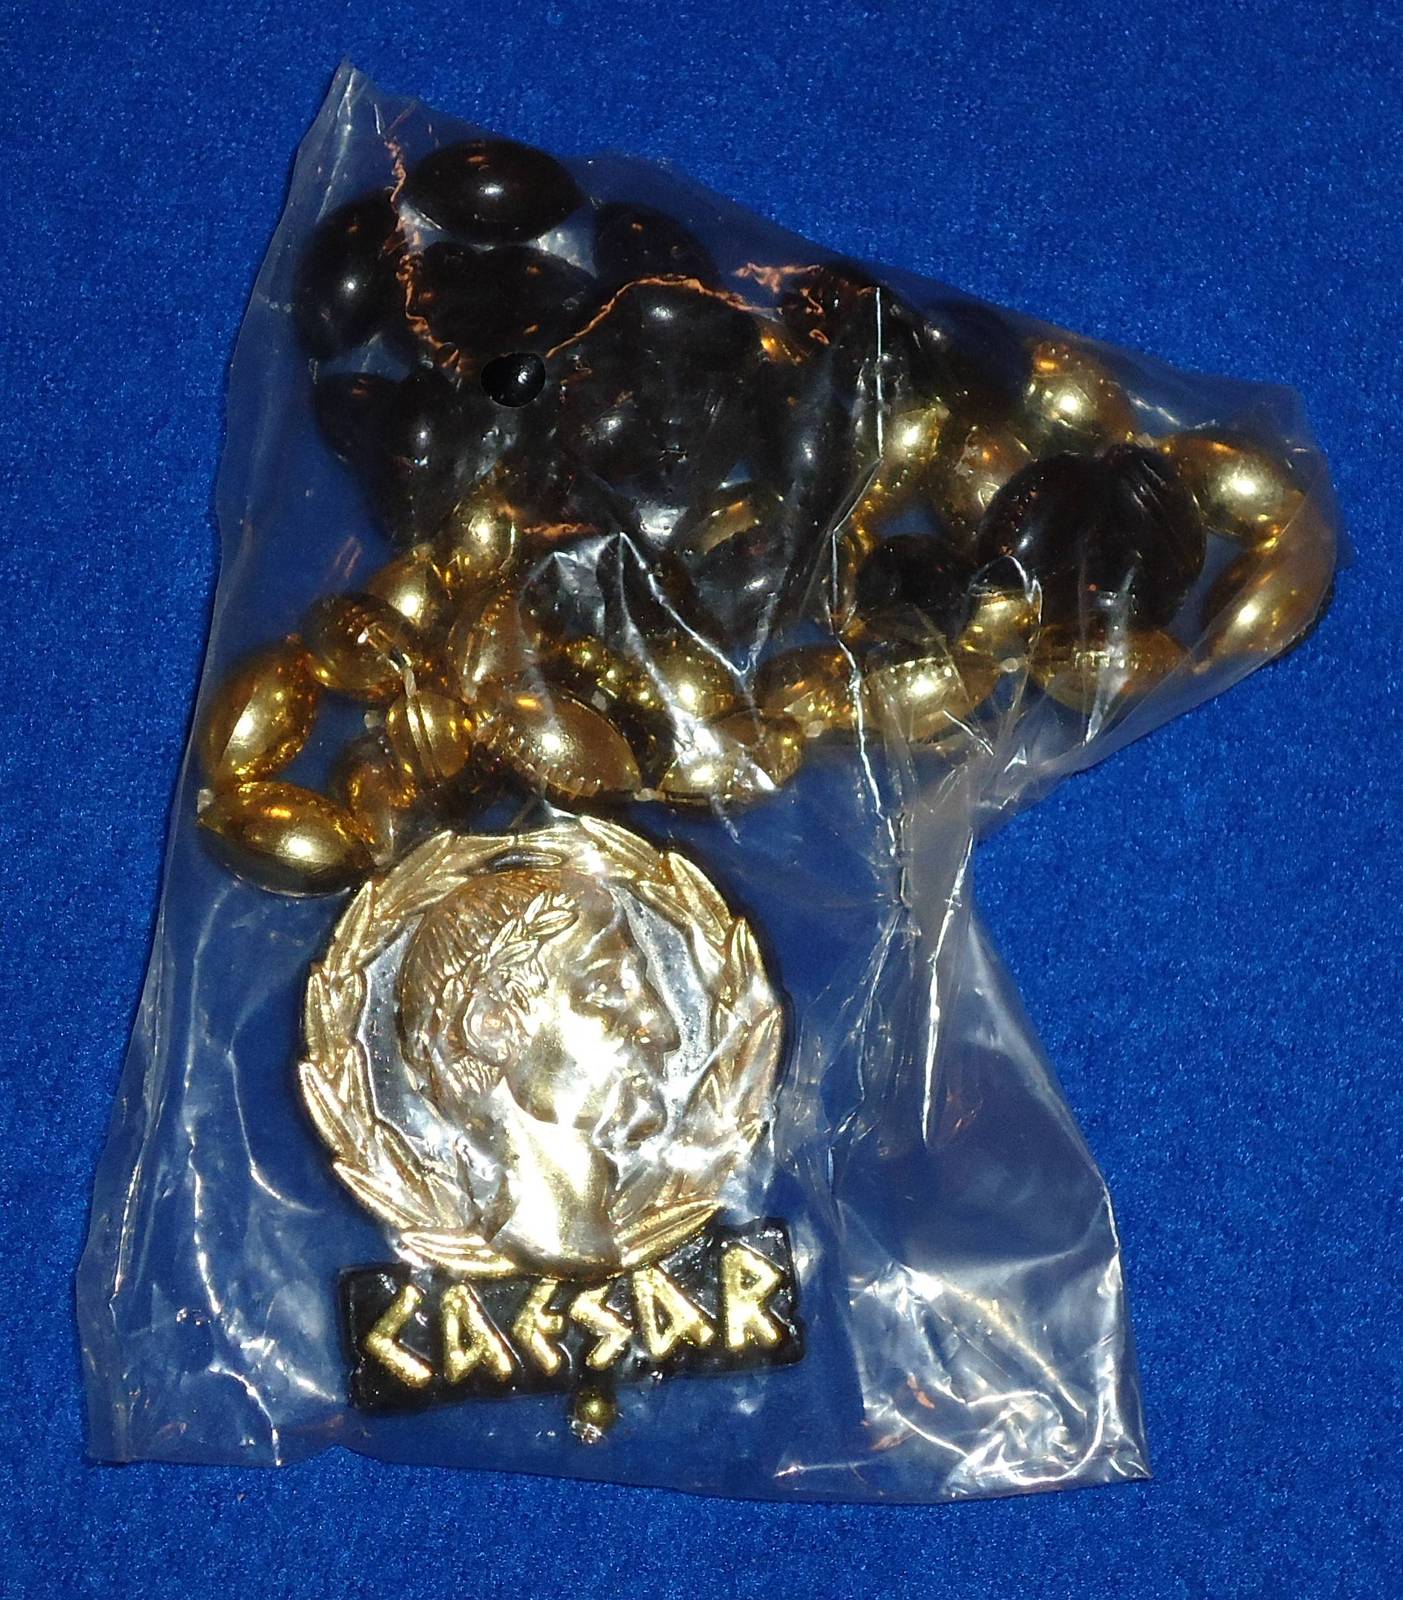 Black and Gold Football Beads